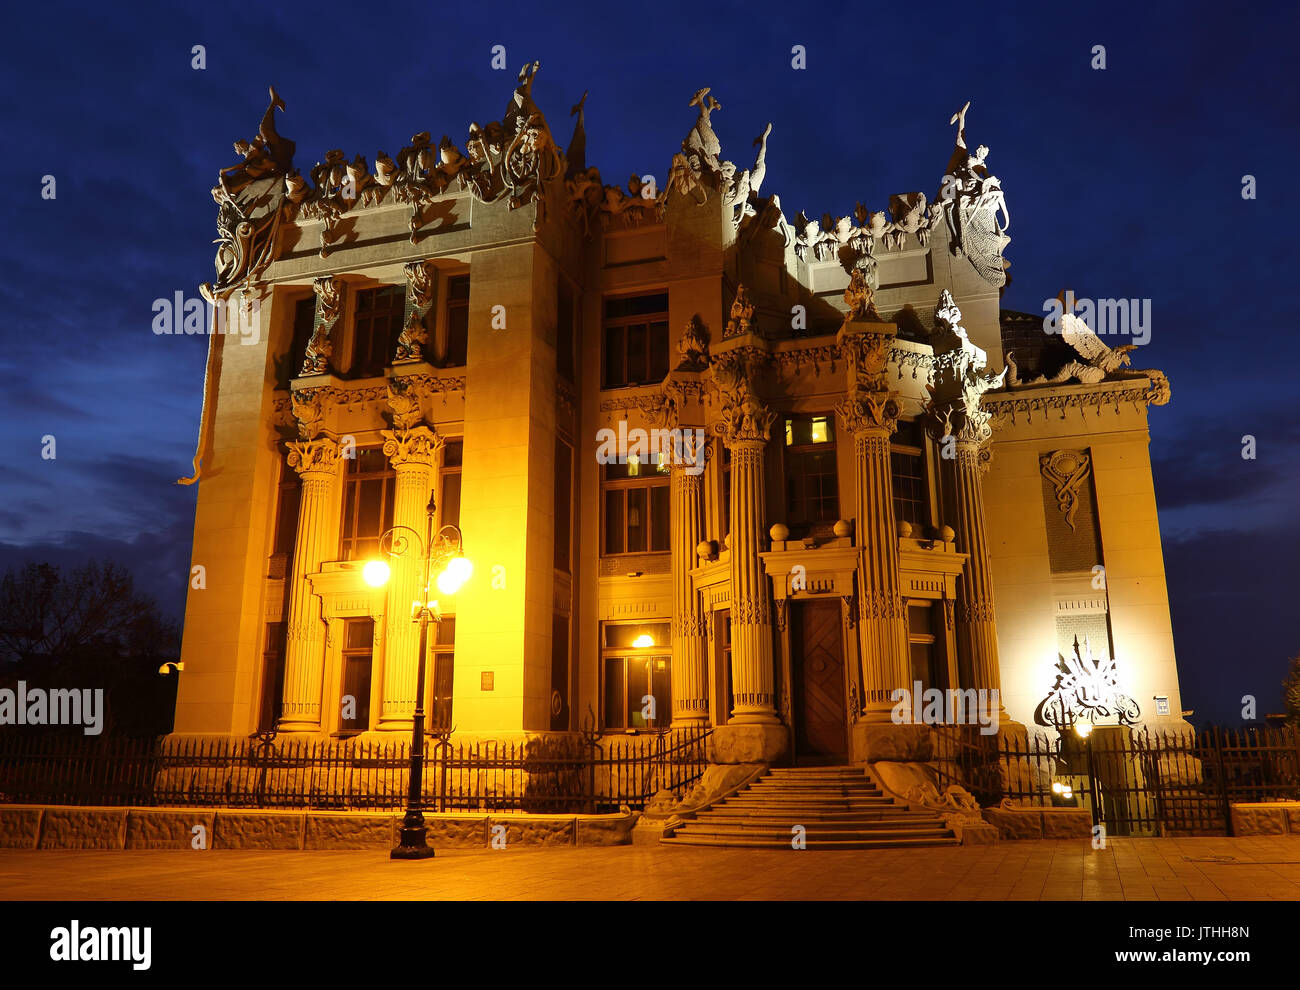 The house with chimeras at night in Kyiv, Ukraine Stock Photo